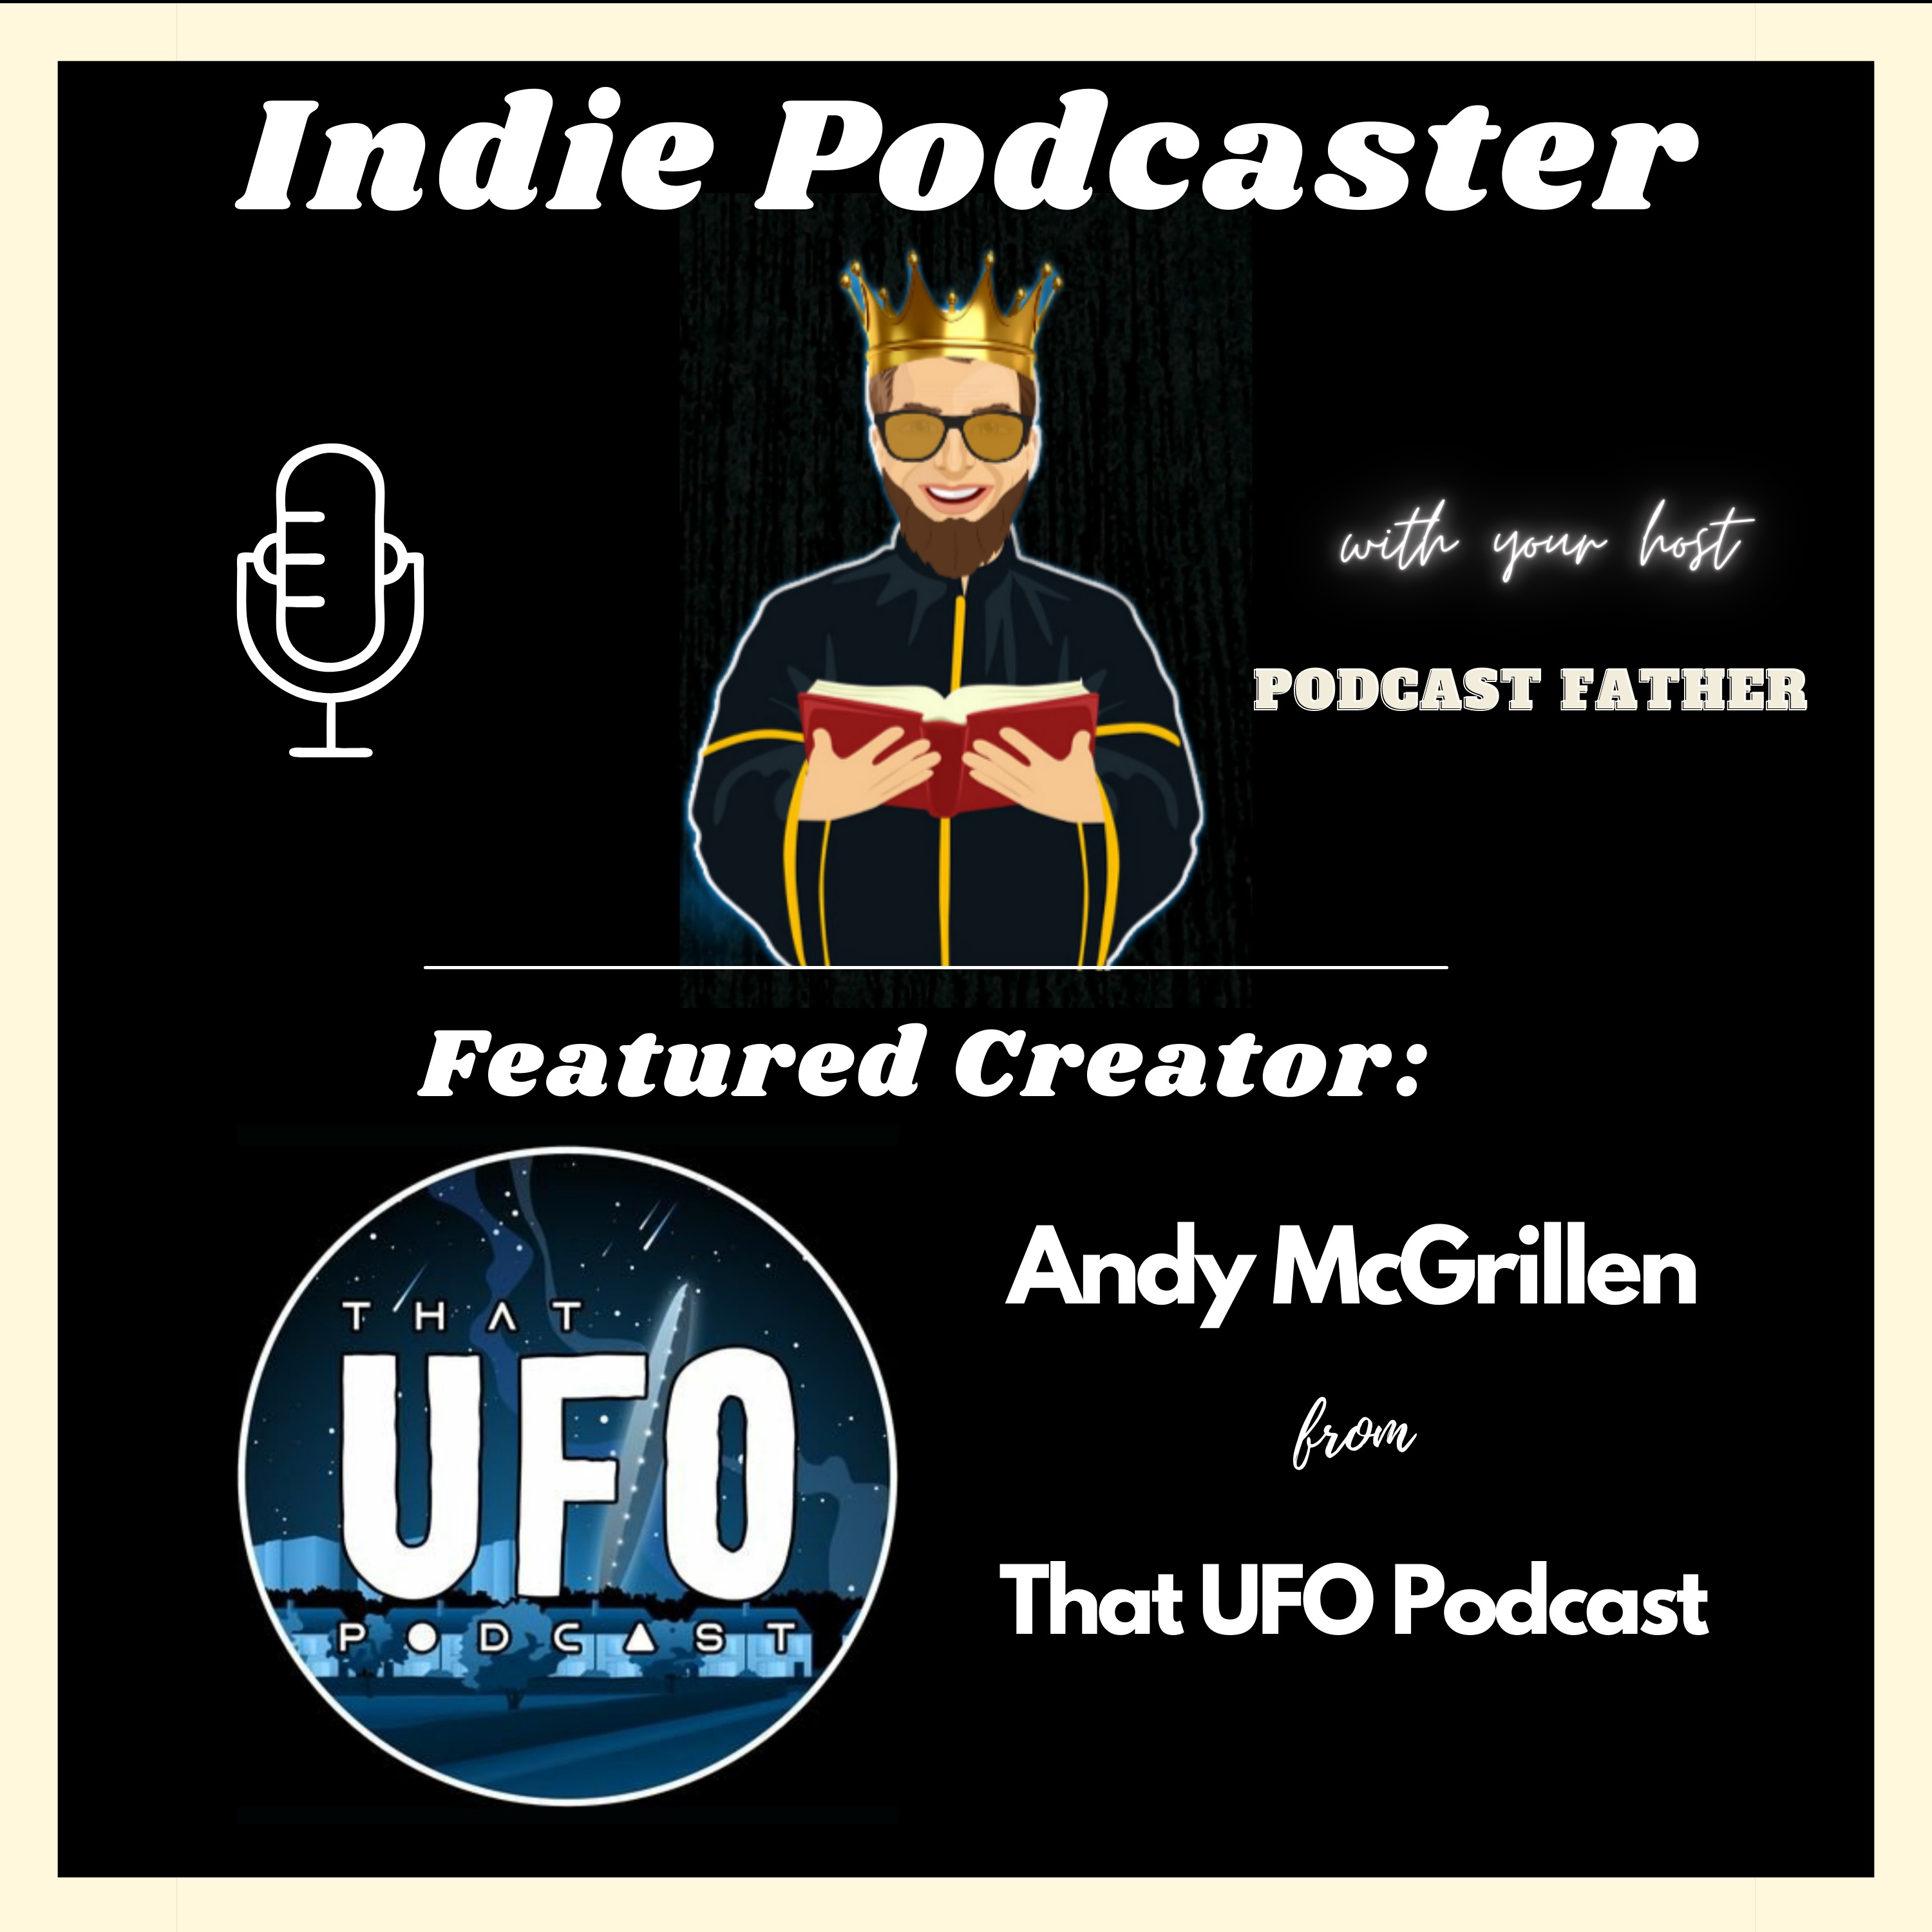 Andy McGillen from That UFO Podcast Image